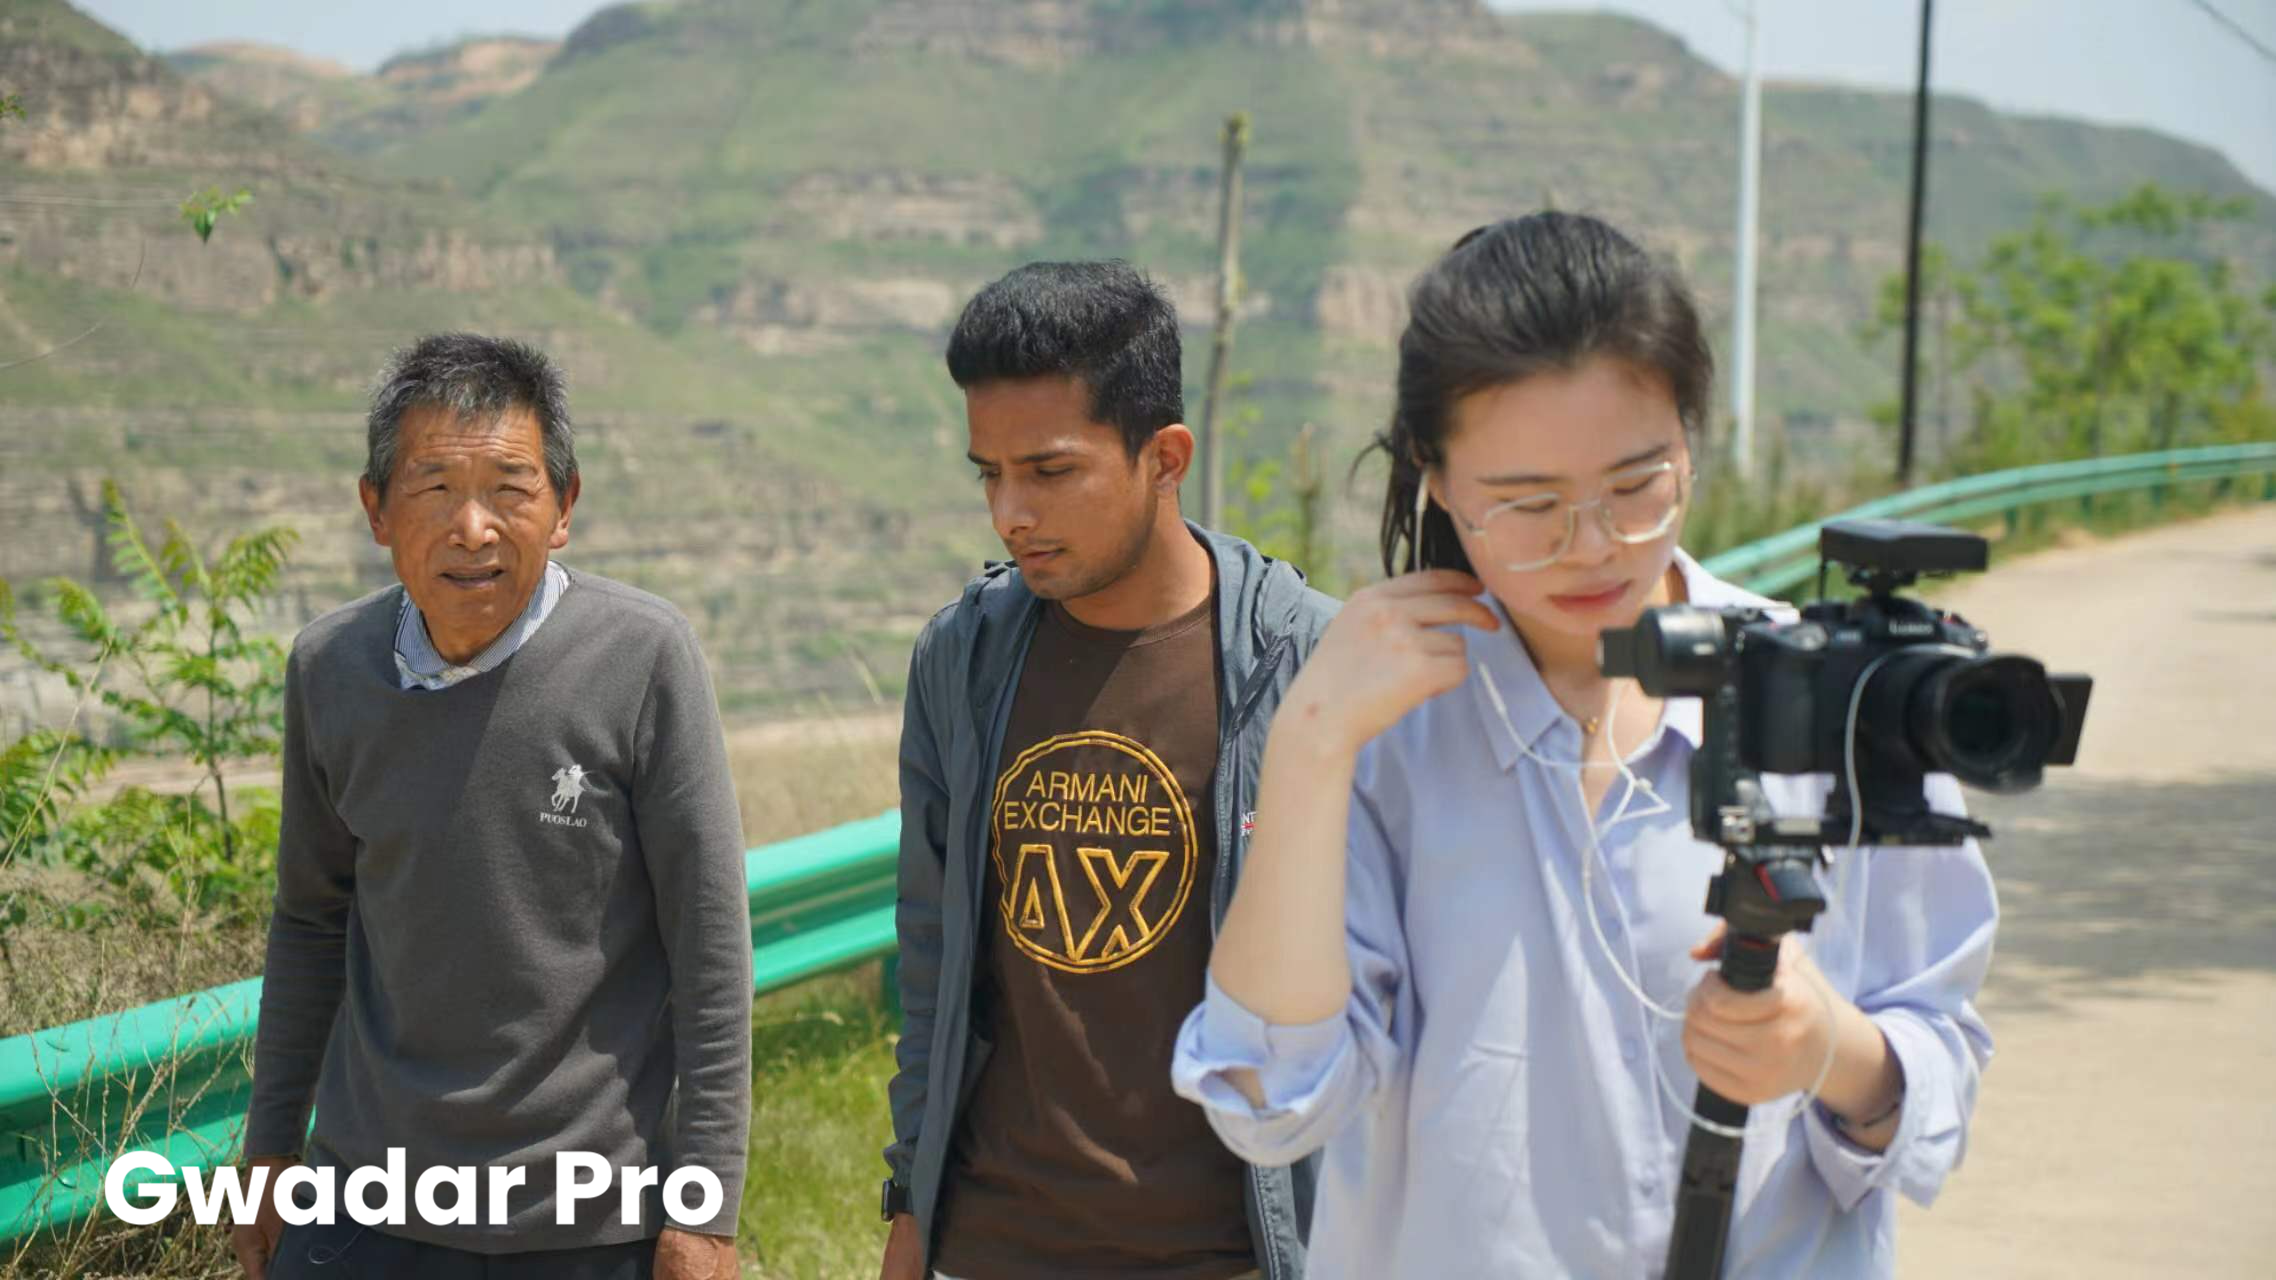 Pakistani students in China showcase talent in youth film project